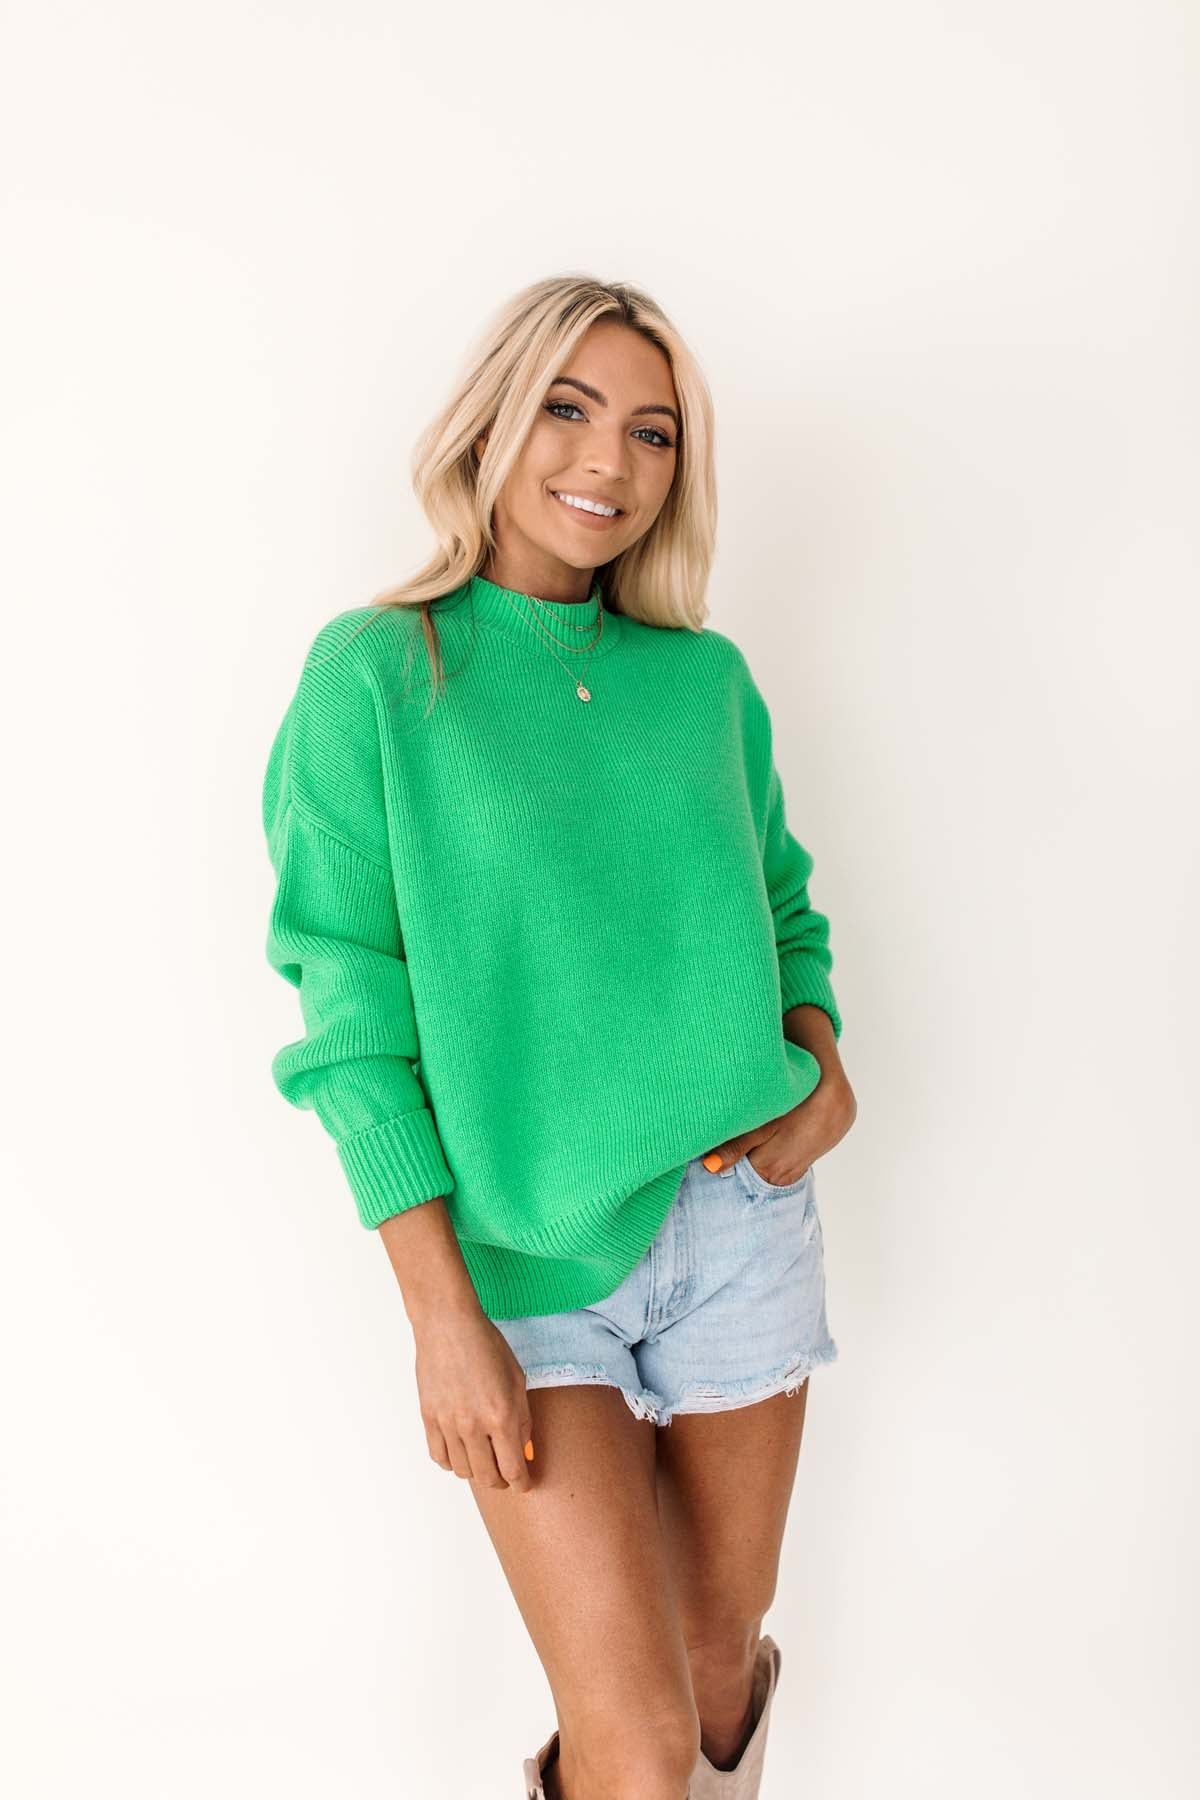 RESTOCK - Cole Kelly Green Lightweight Sweater | The Post